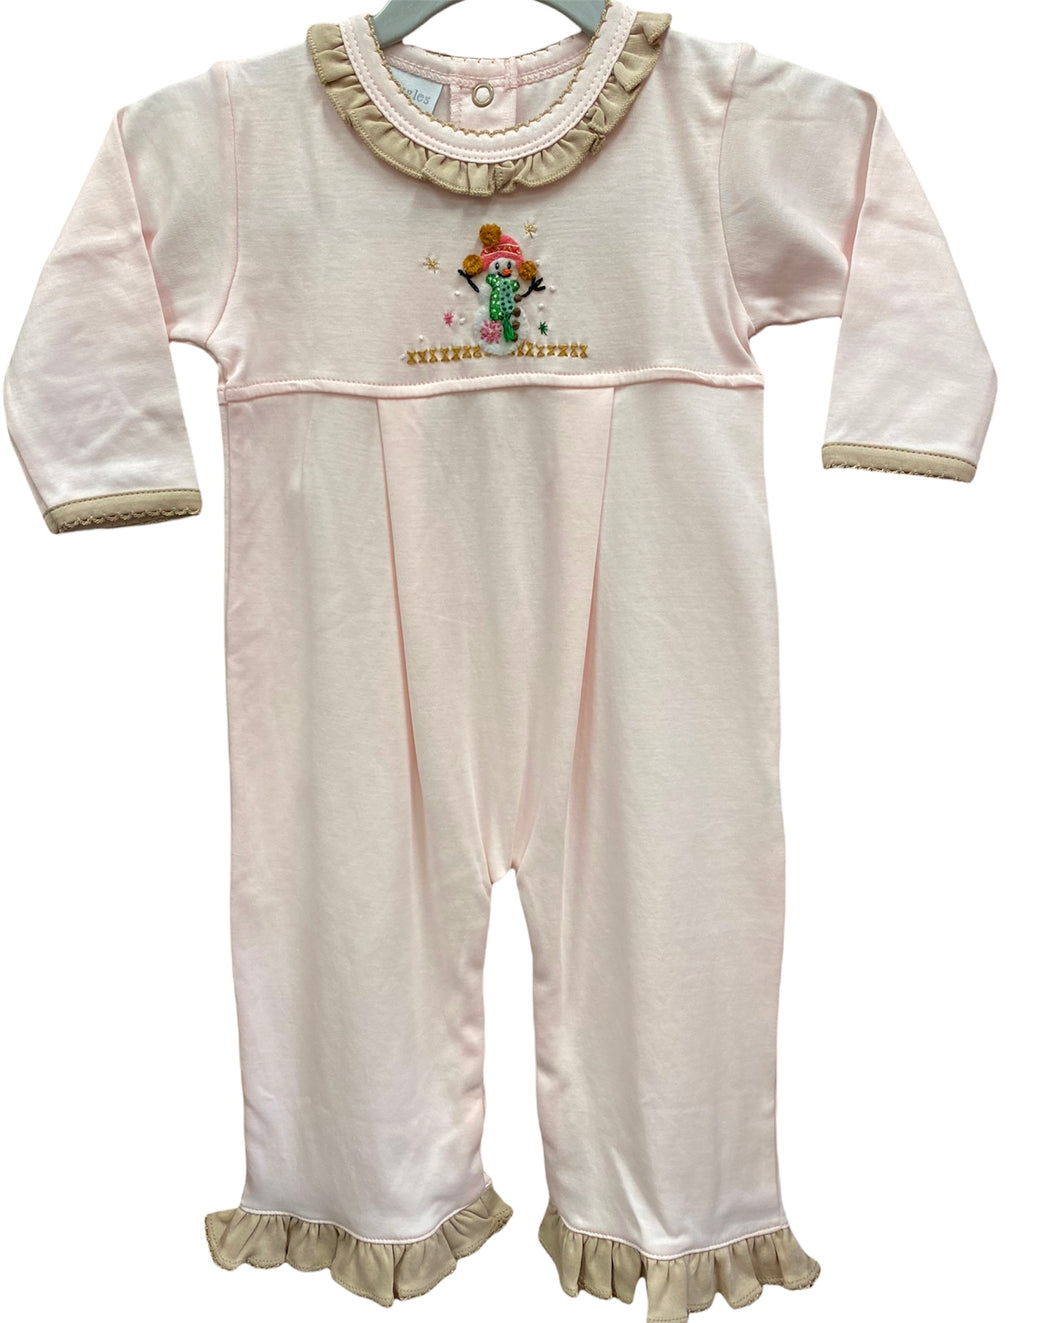 Light Pink Snowman Romper by Squiggles